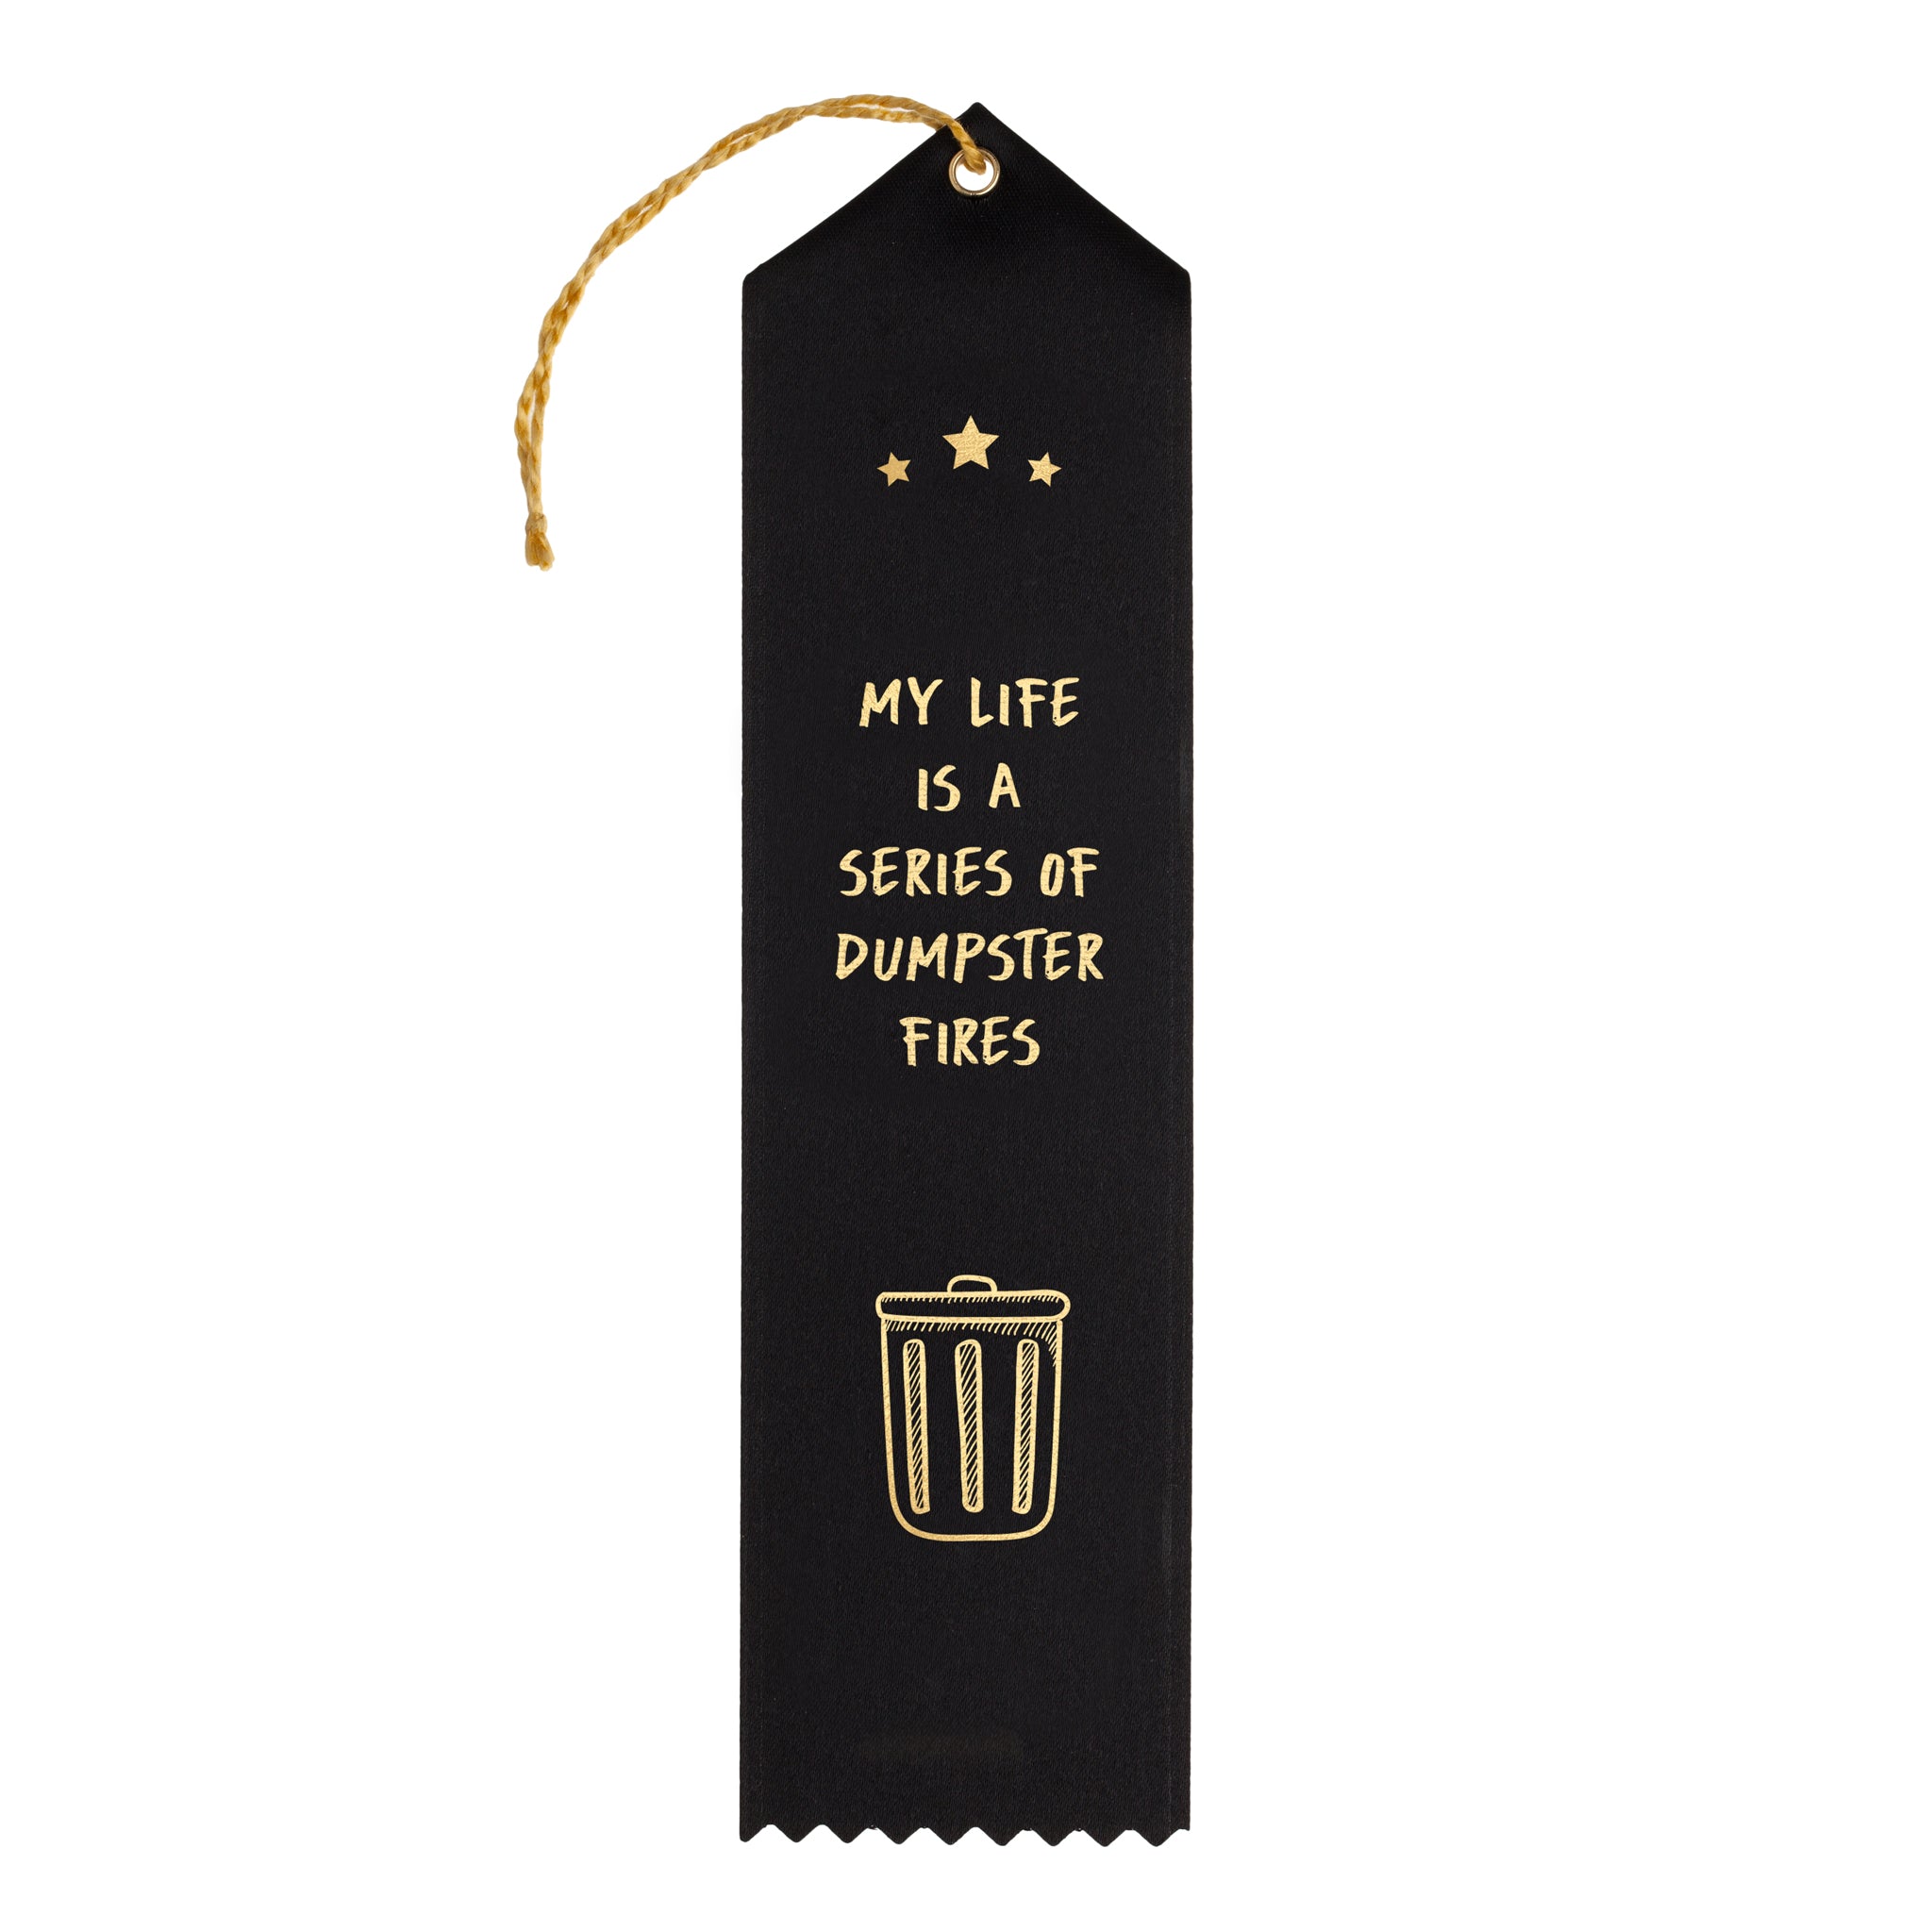 My Life is a Series of Dumpster Fires Award Ribbon